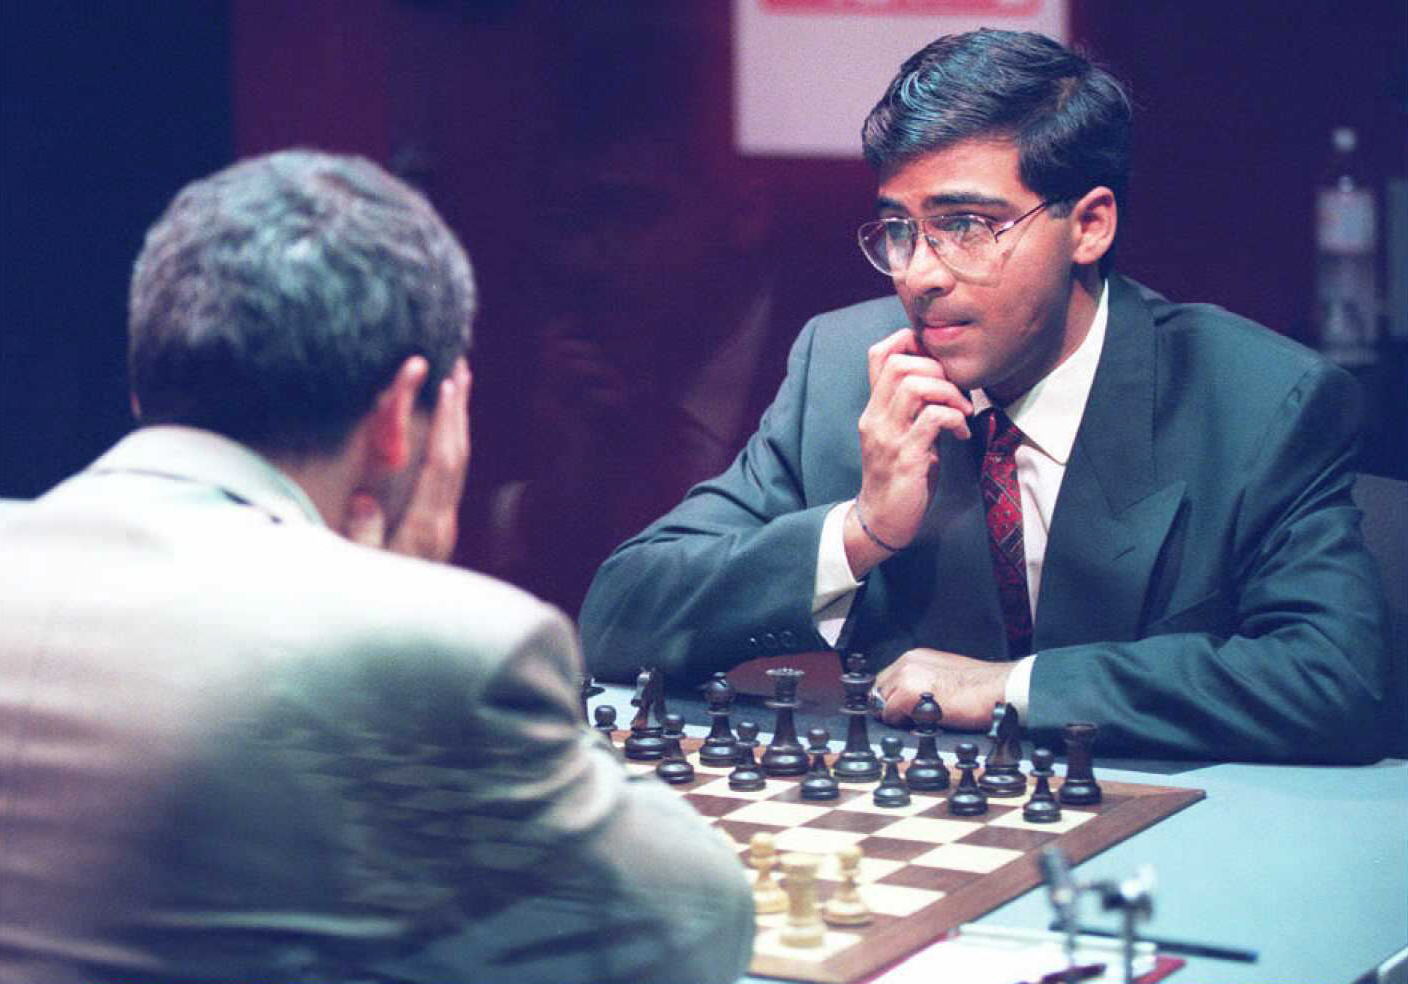 Gary Kasparov on Carlsen's Chess Magic for the Time List of 100 Most  Influential People in the World ~ World Chess Championship 2013 Viswanathan  Anand vs Magnus Carlsen at Chennai Hyatt Regency